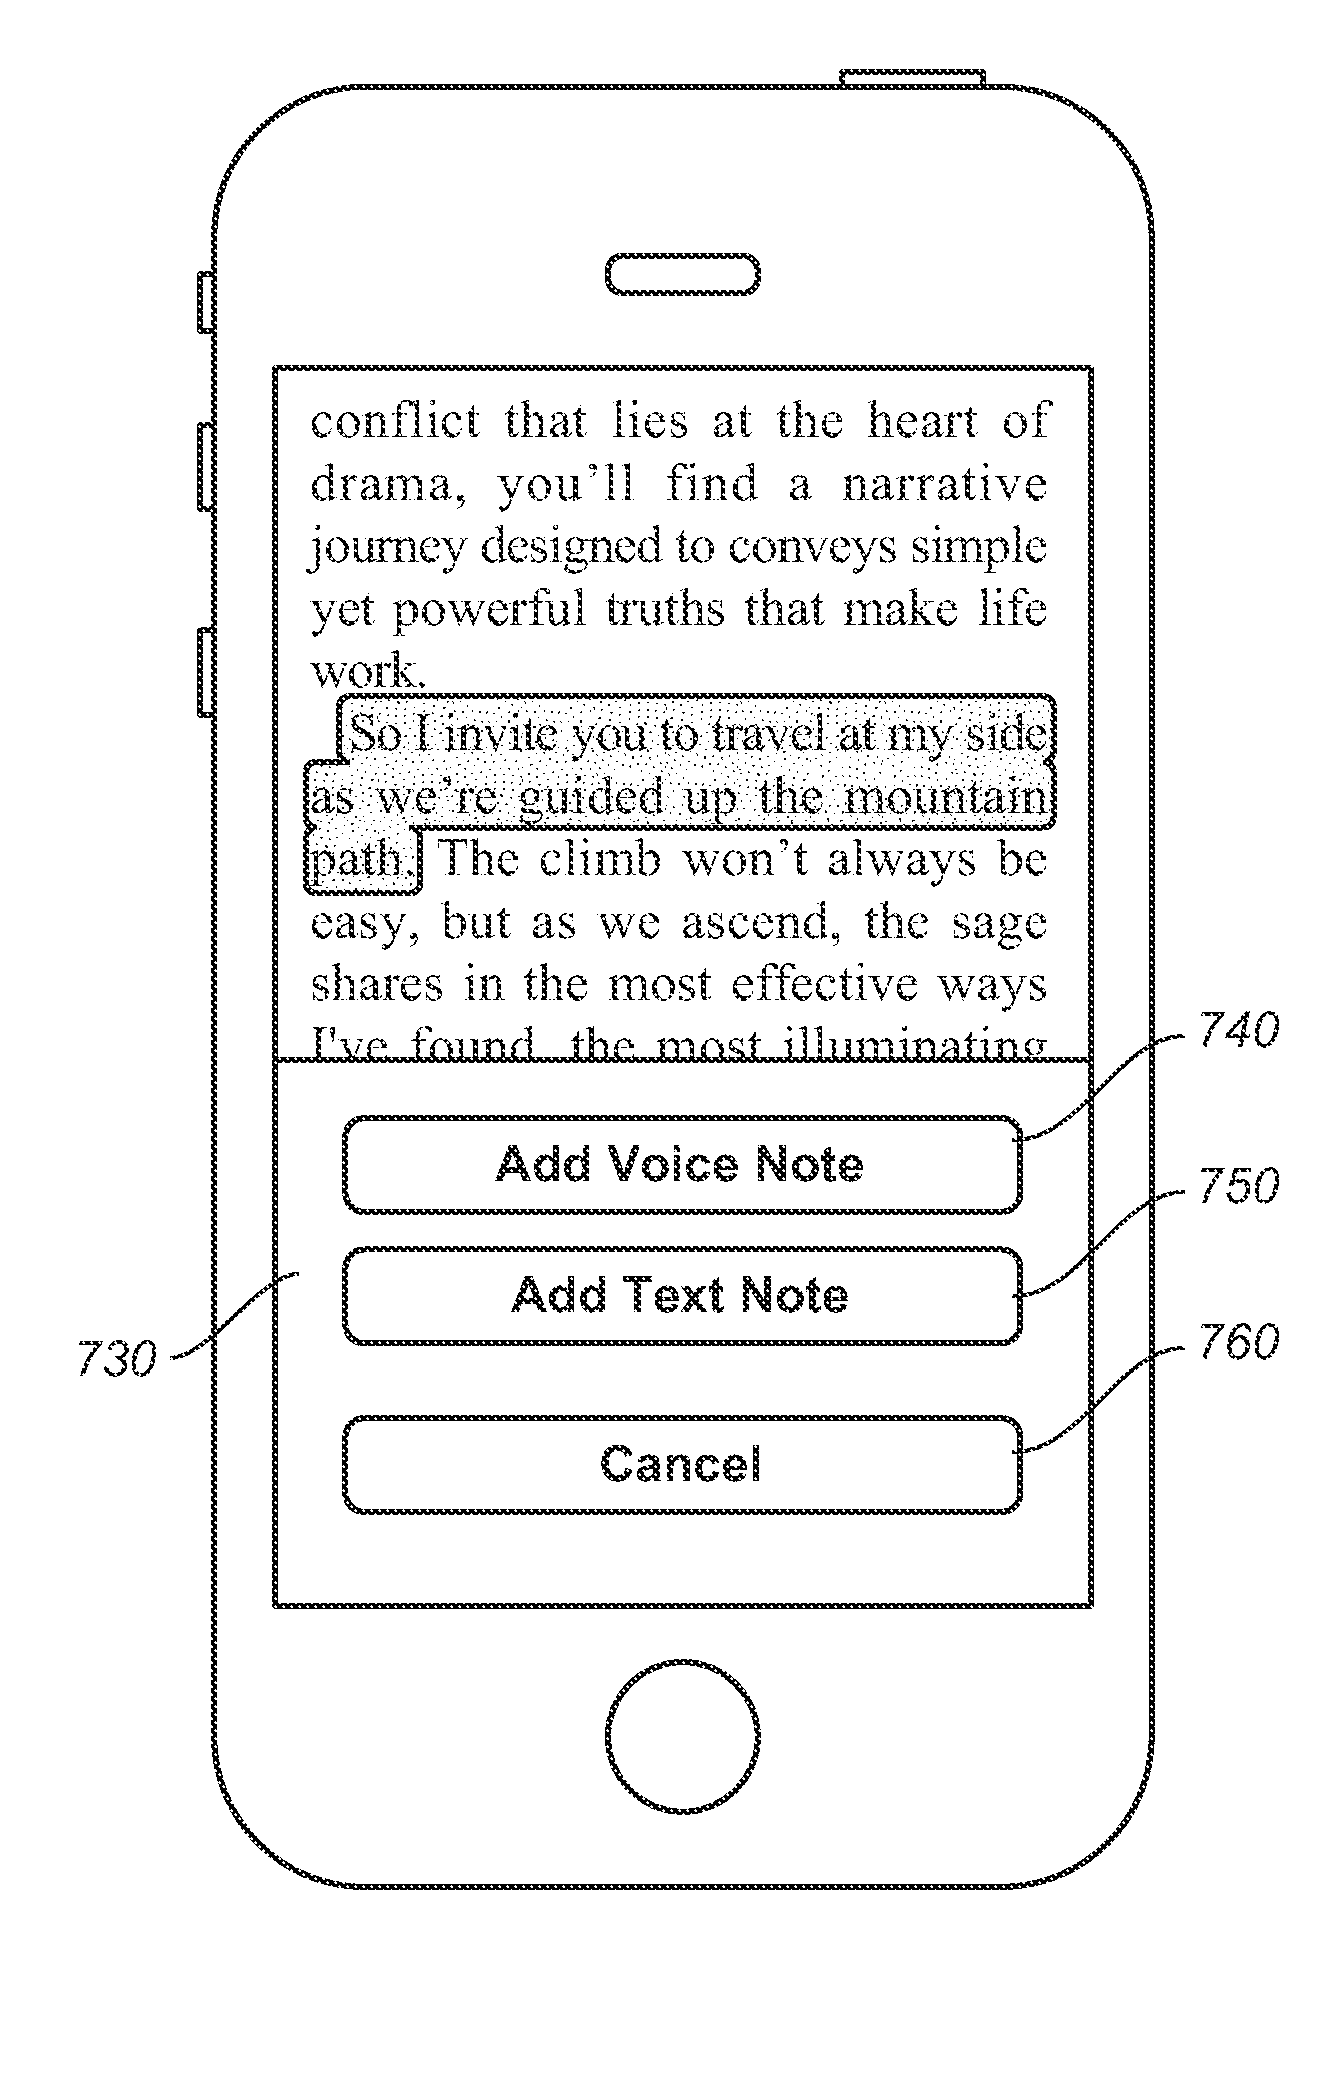 E-book reader with voice annotation